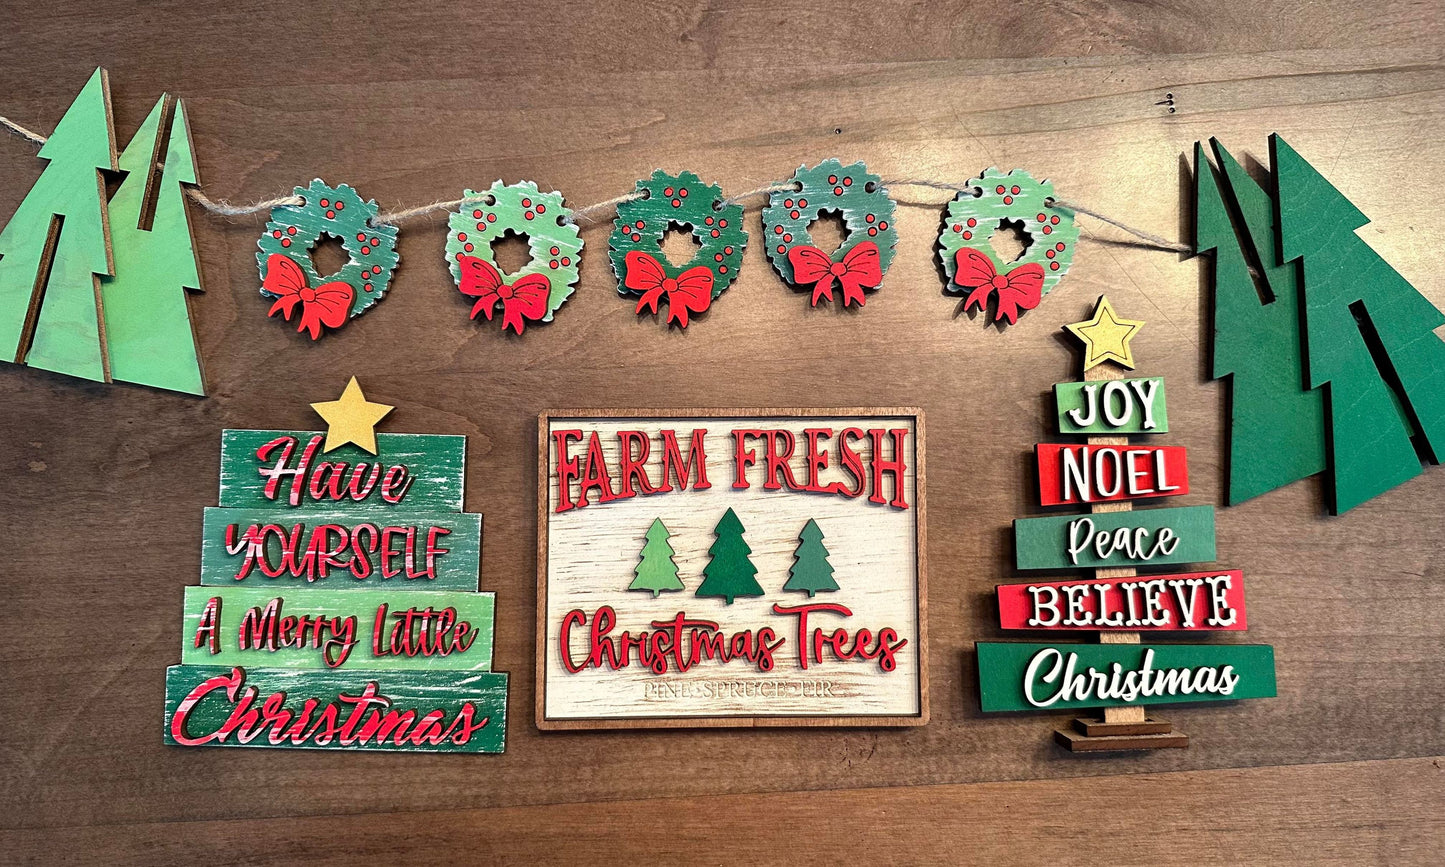 3D Tiered Tray Decor - Have yourself a Merry little Christmas with wreaths